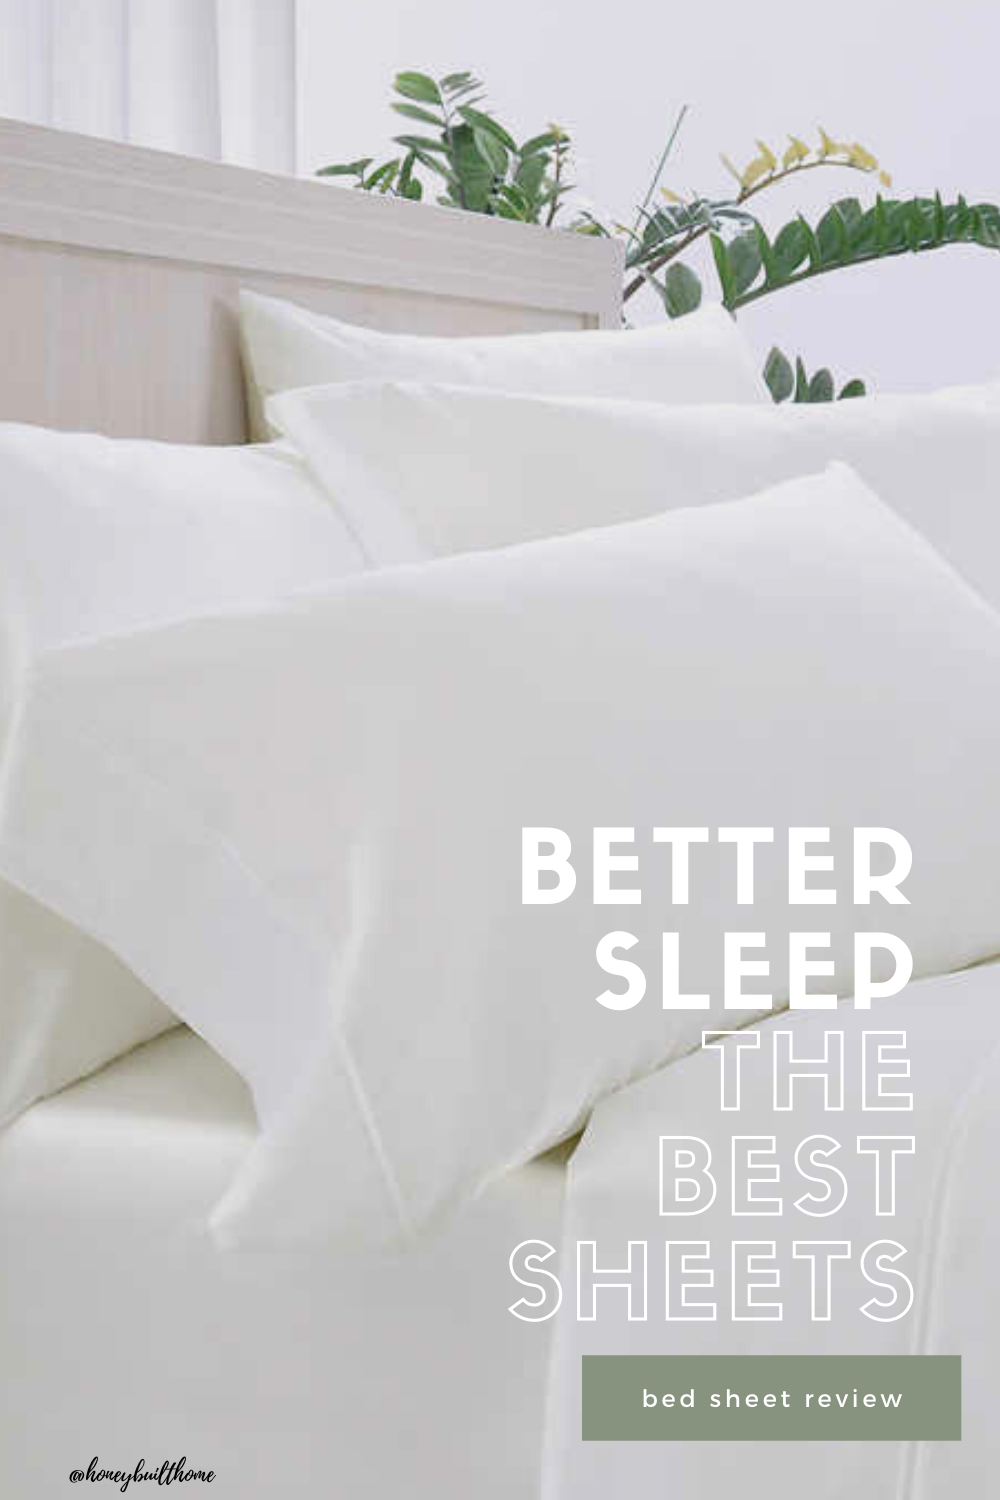 Bed Sheet Review: The Best Bed Sheets, But seriously.